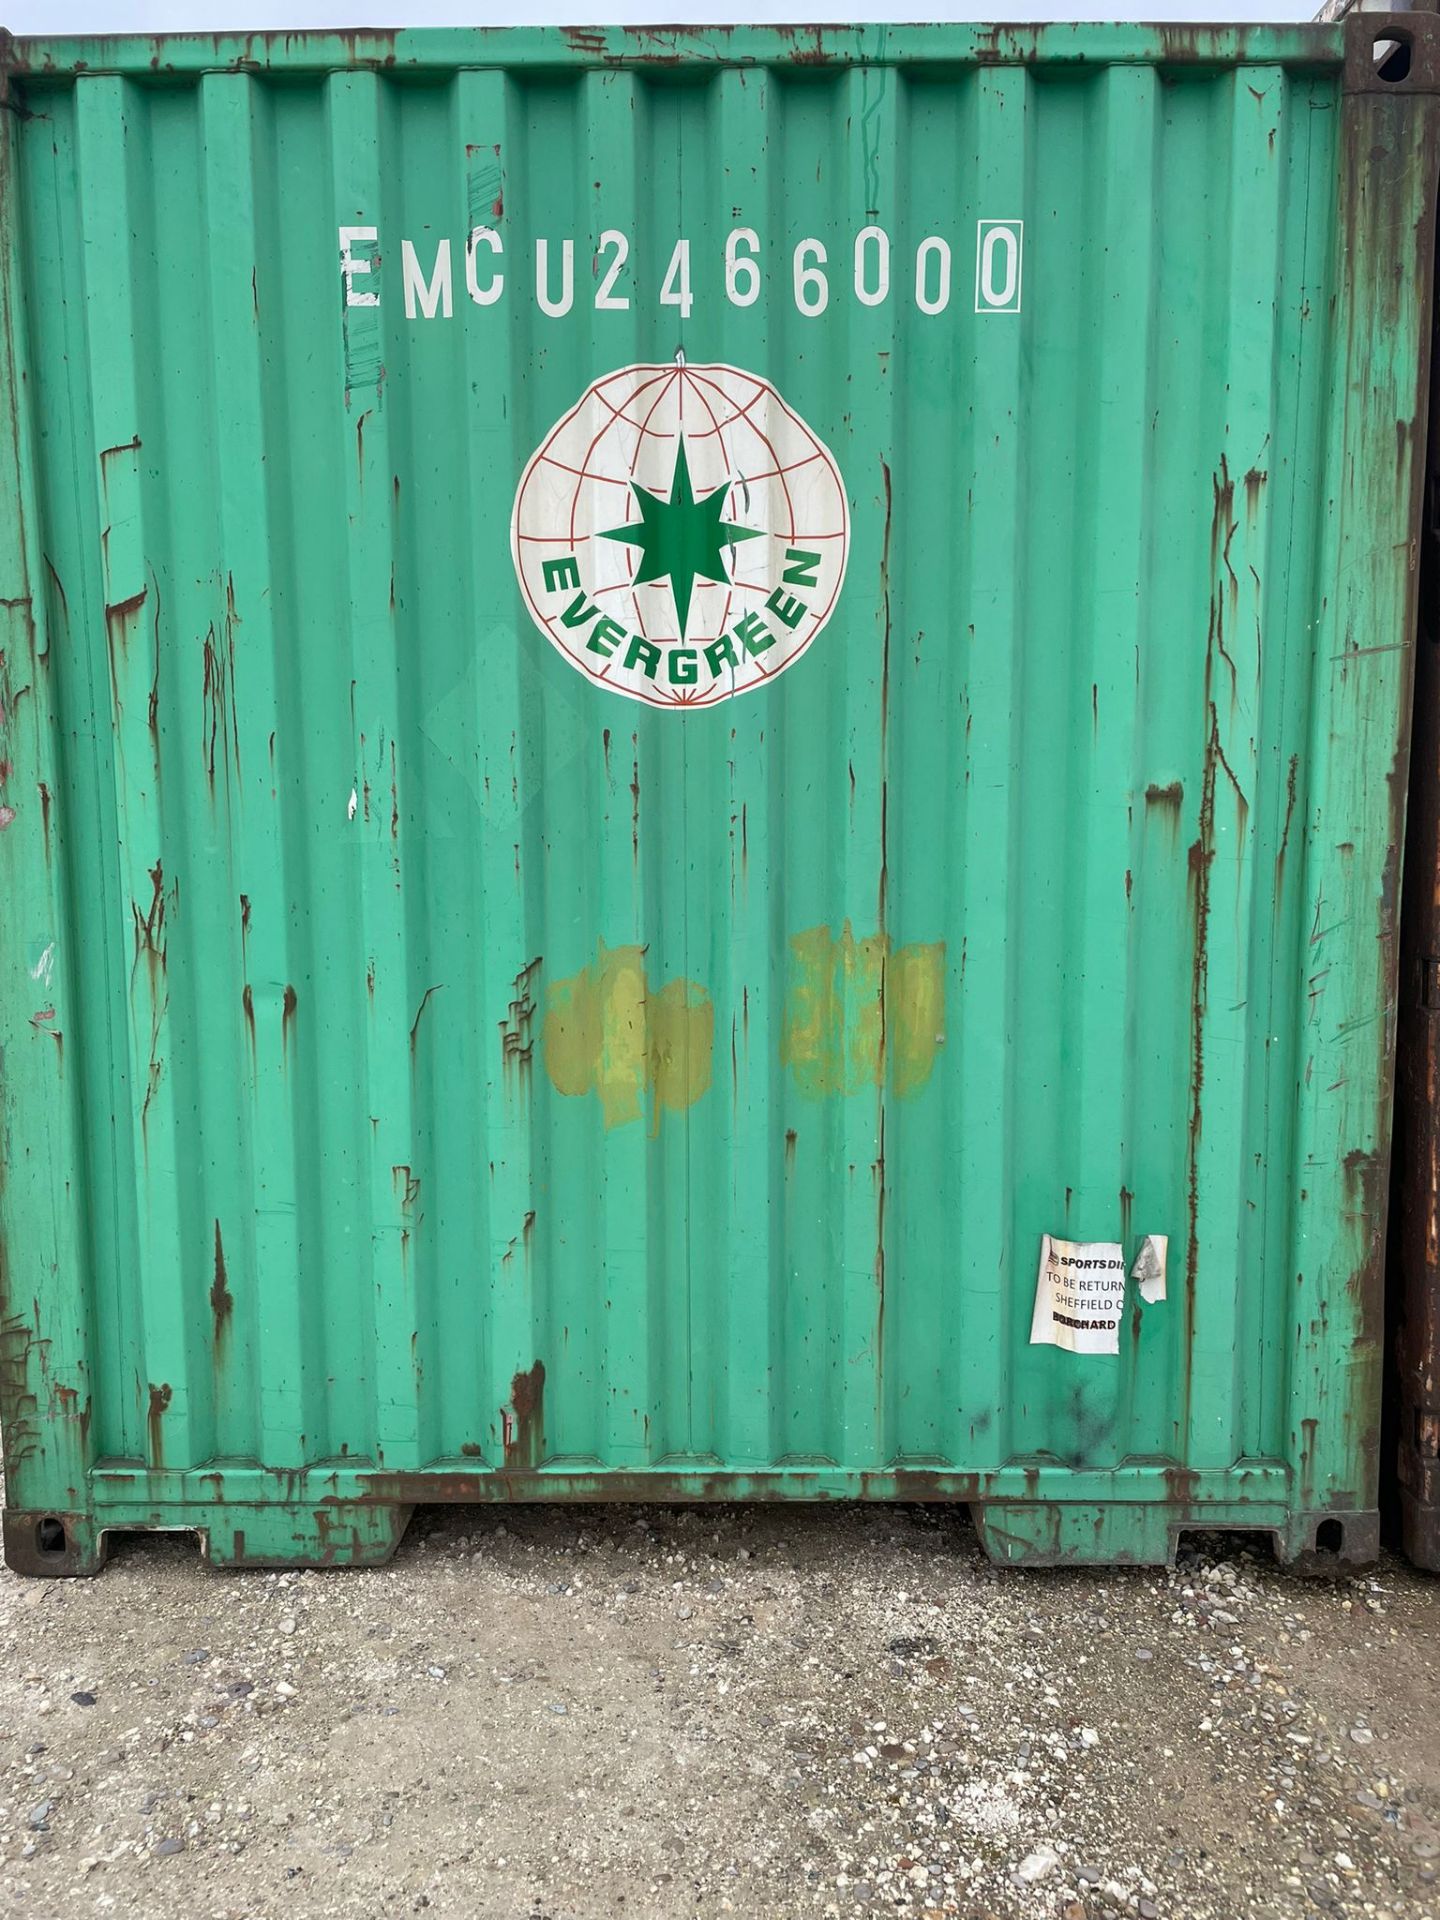 Shipping Container - ref EMCU2466000 - NO RESERVE (40’ GP - Standard) - Image 4 of 4